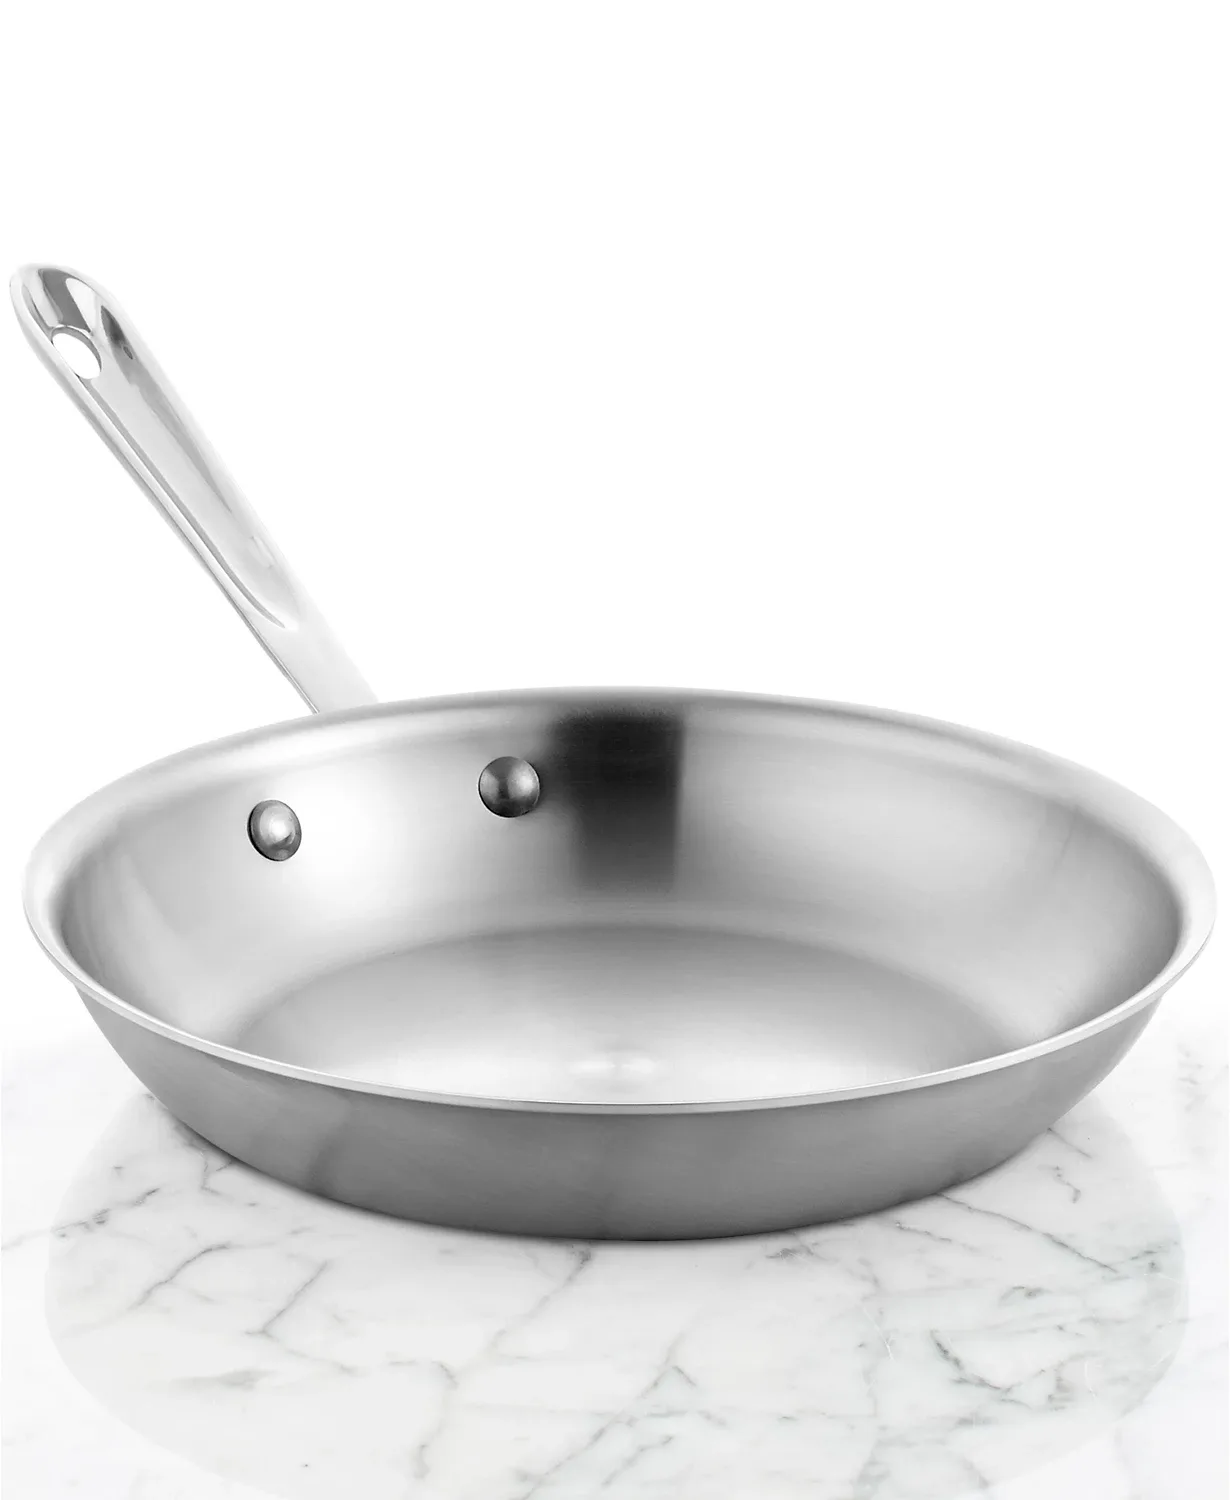 All-Clad D5 Brushed Stainless Steel 4-Qt. Covered Weeknight Saute Pan -  Macy's